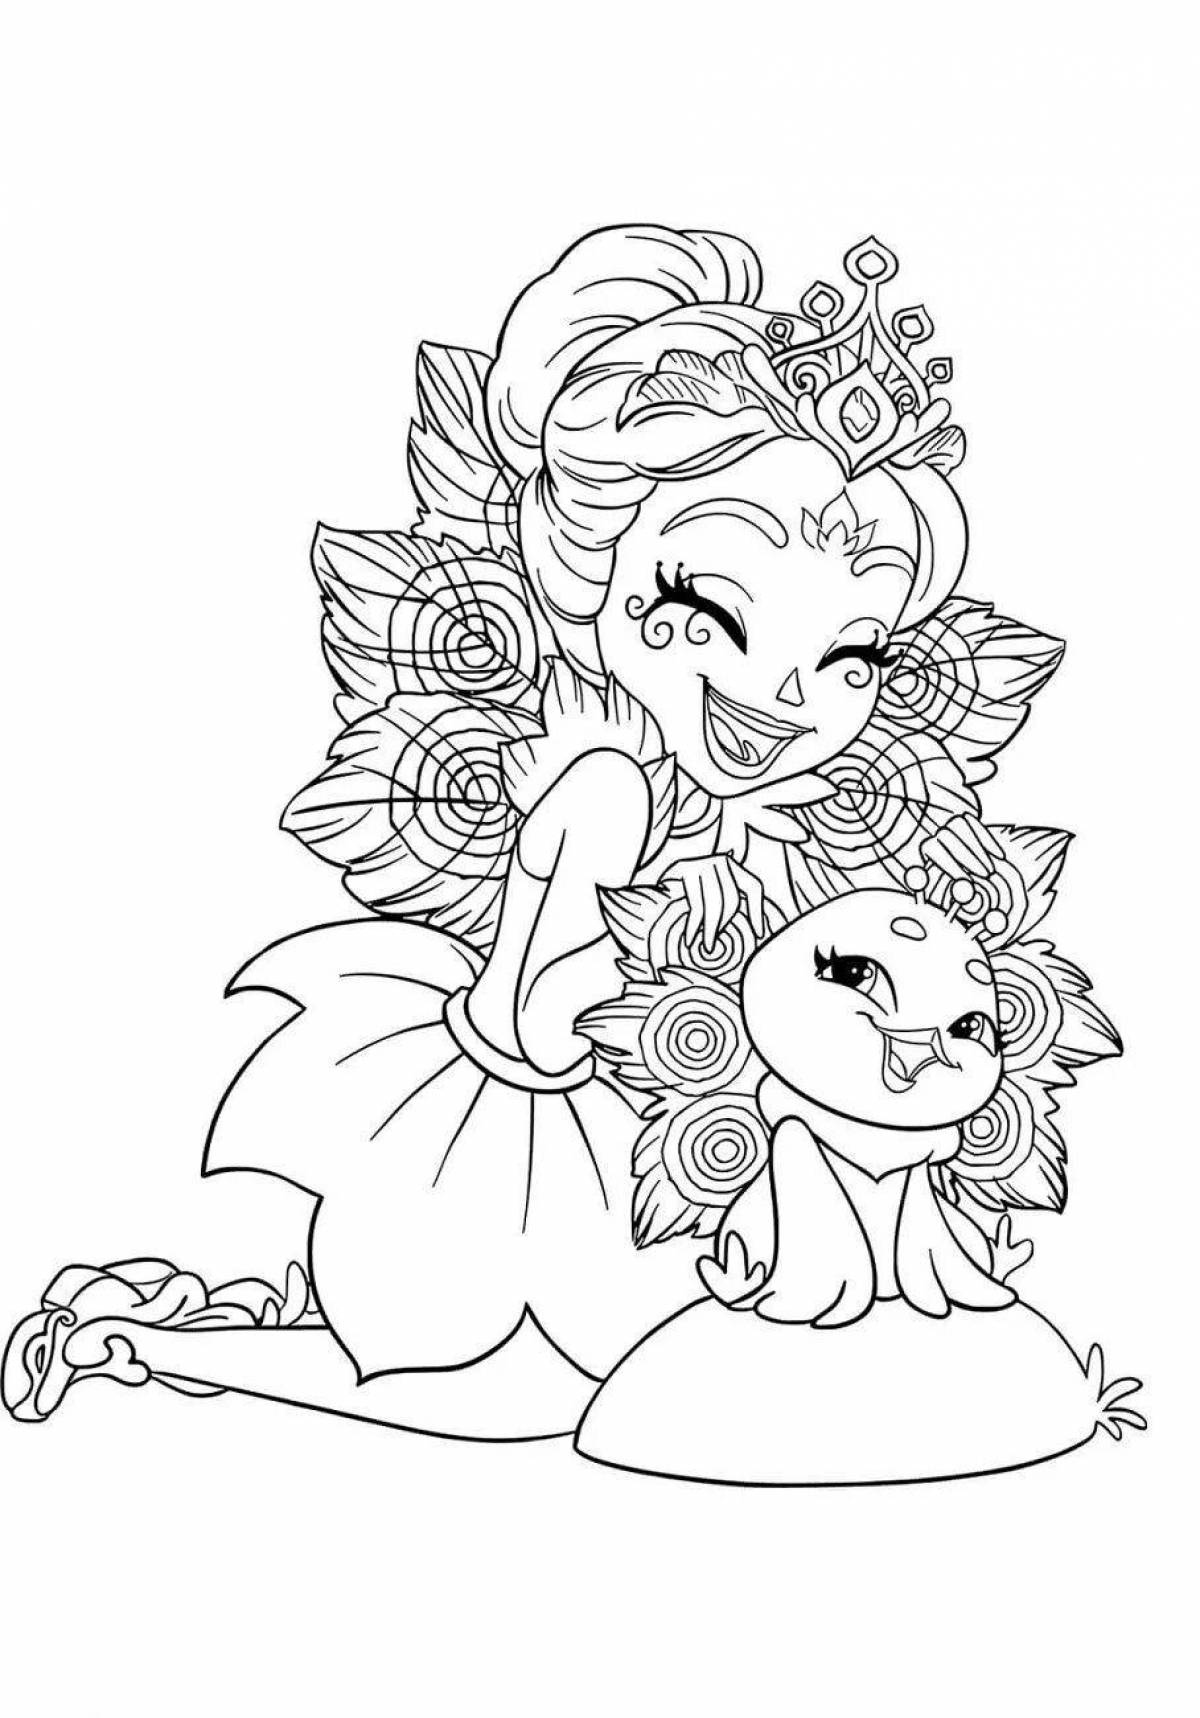 Coloring page enchantment